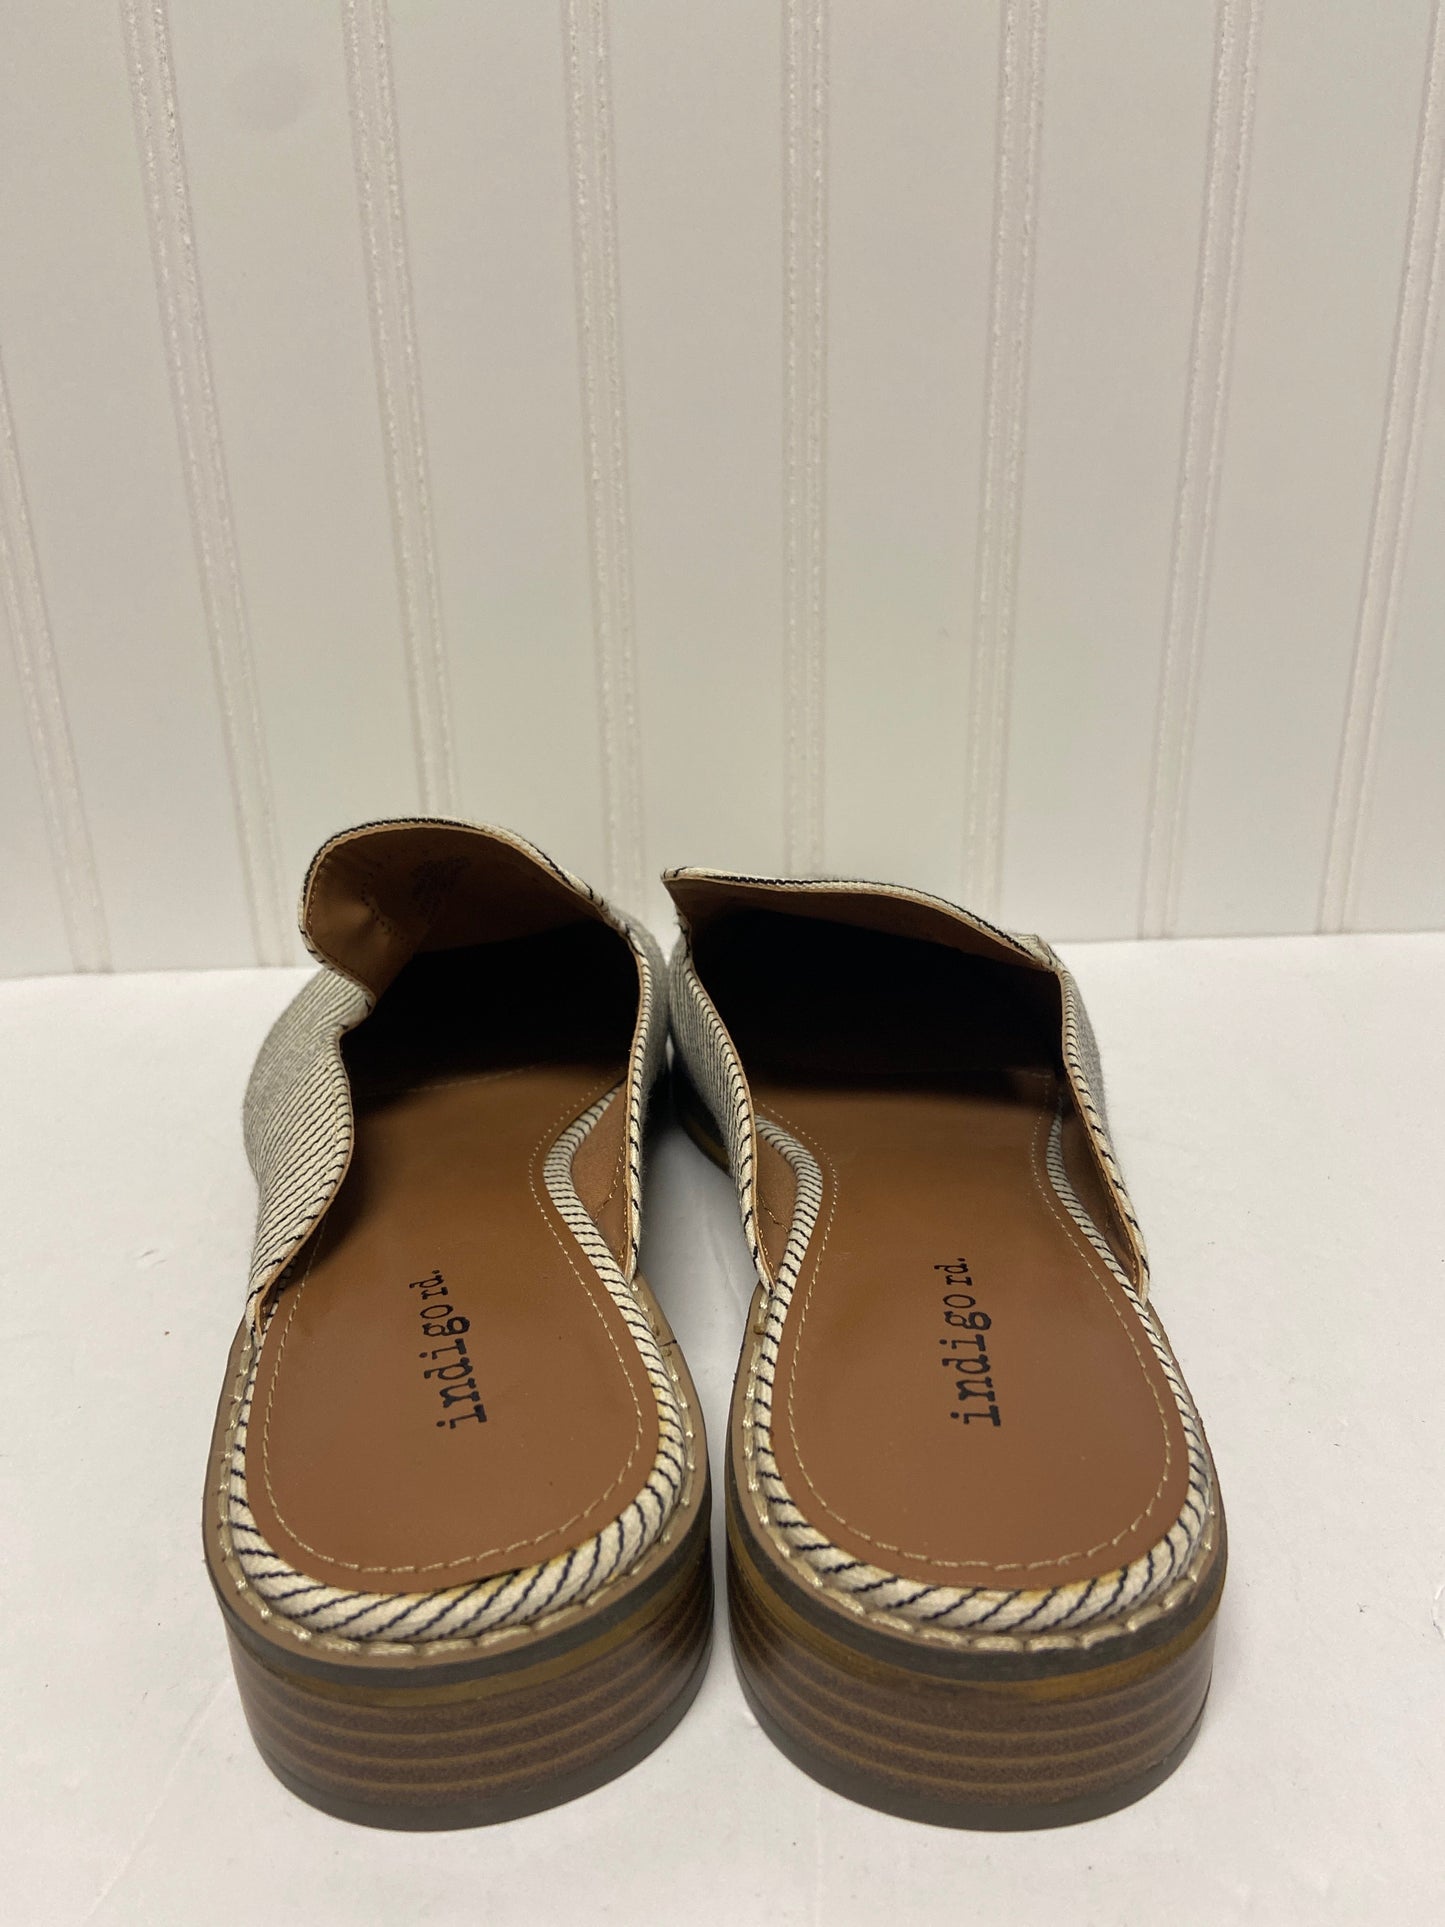 Shoes Flats By Indigo Rd  Size: 8.5